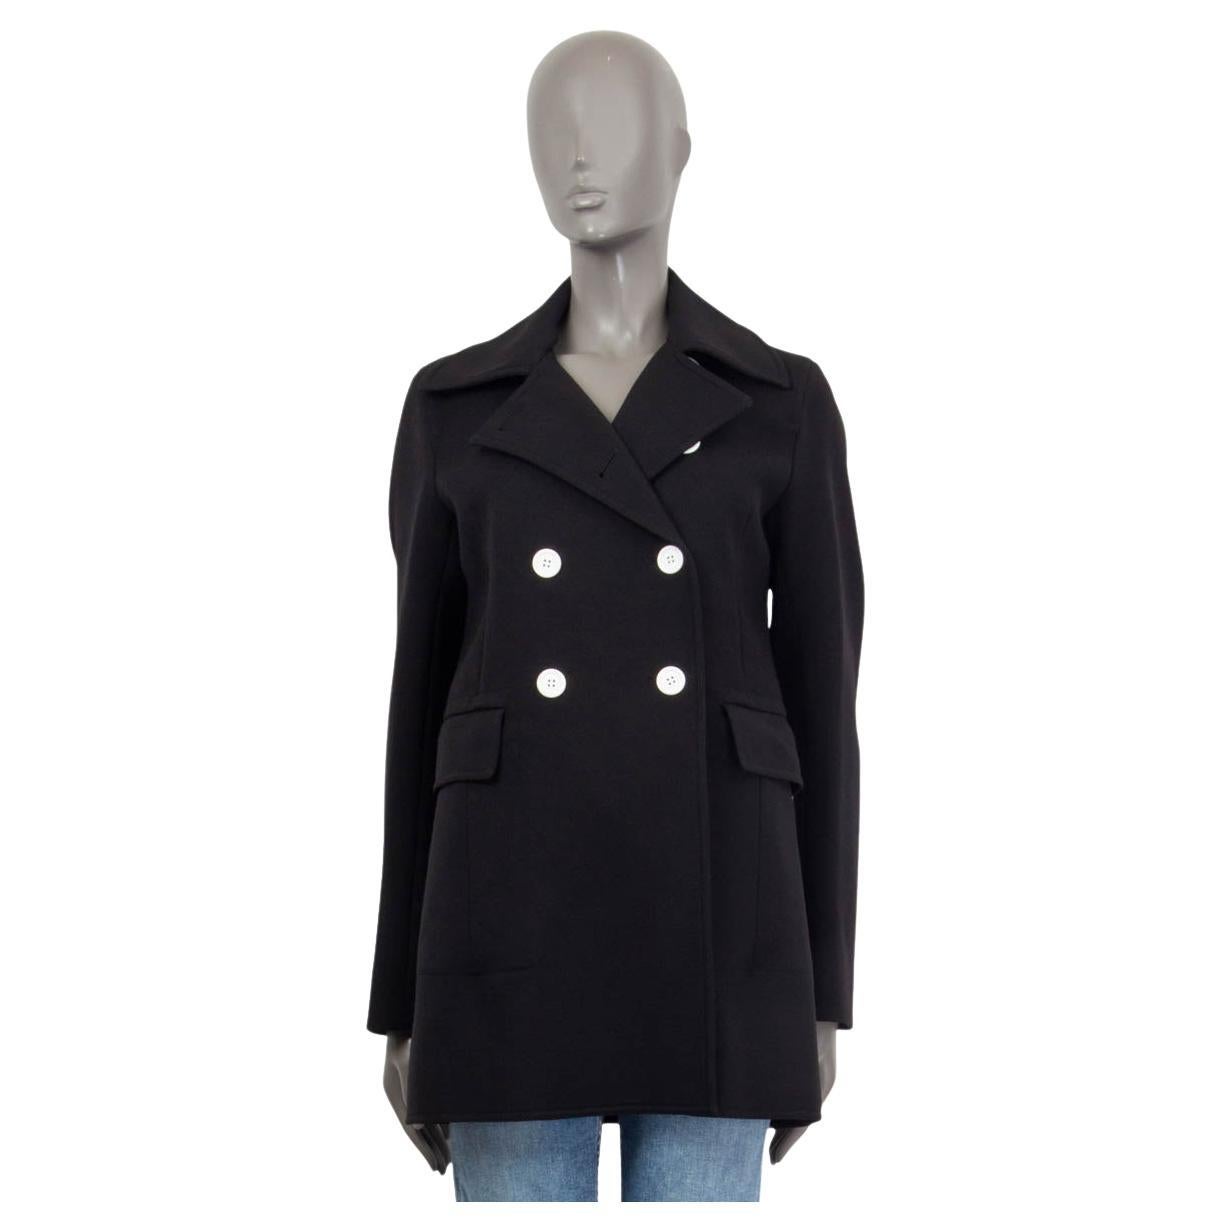 Louis Vuitton - Leather Accent Double-Breasted Coat - Black - Women - Size: 44 - Luxury